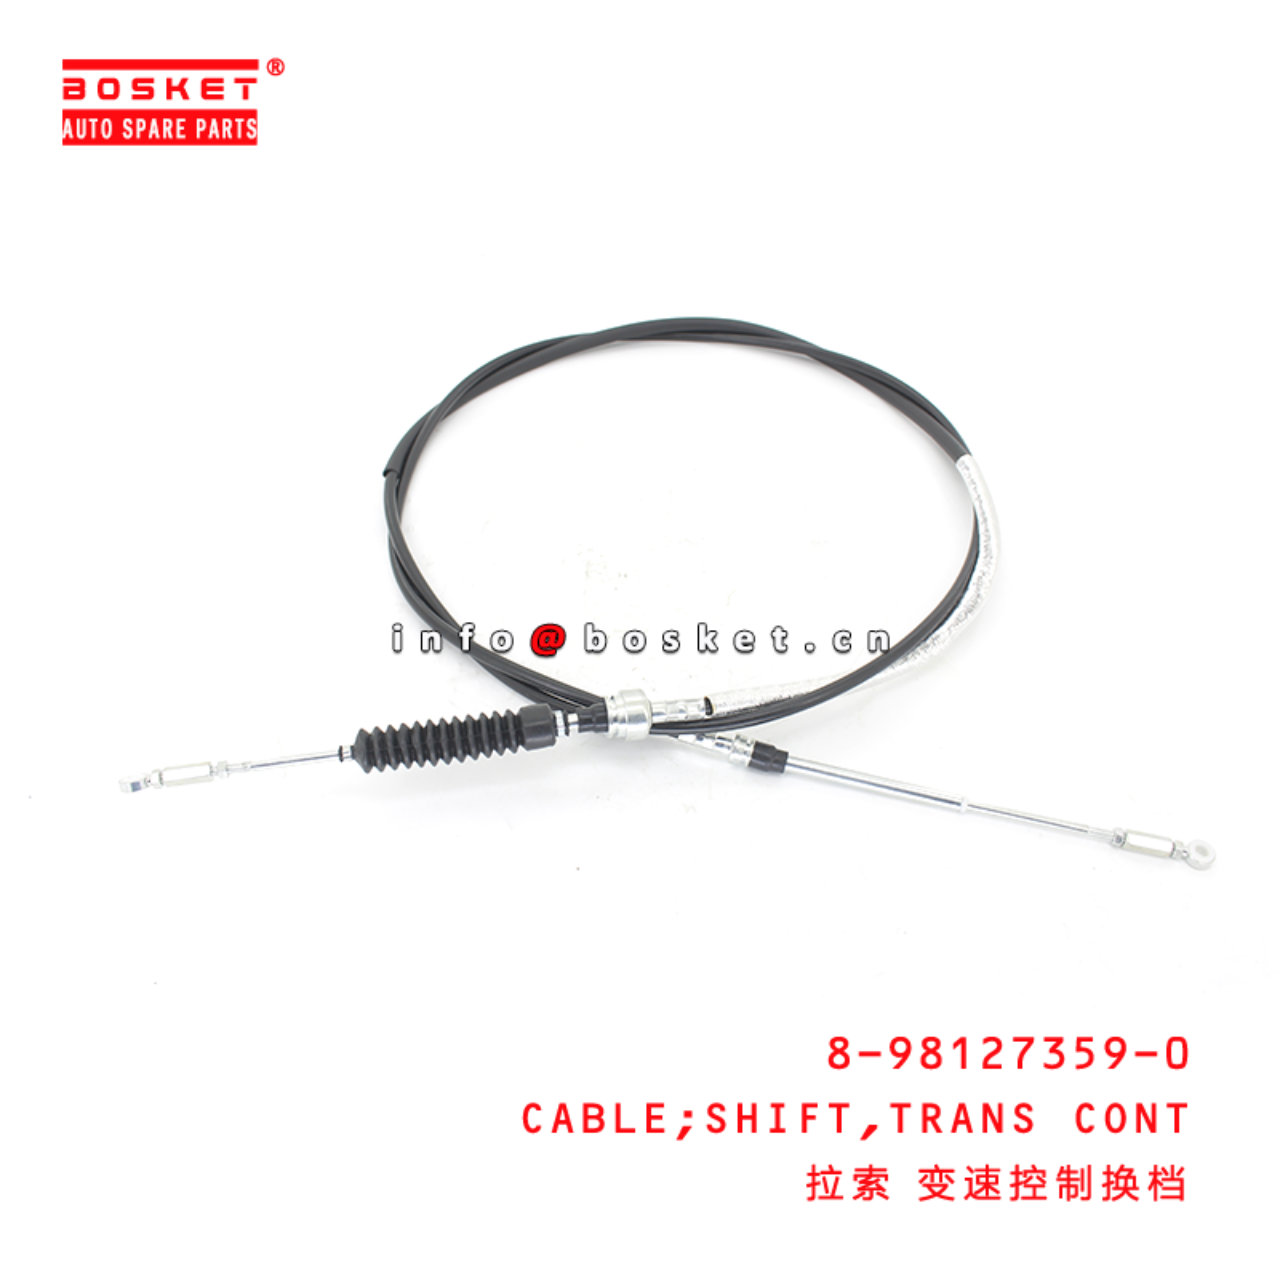 8-98127359-0 Transmission Control Shift Cable Suitable for ISUZU   8981273590